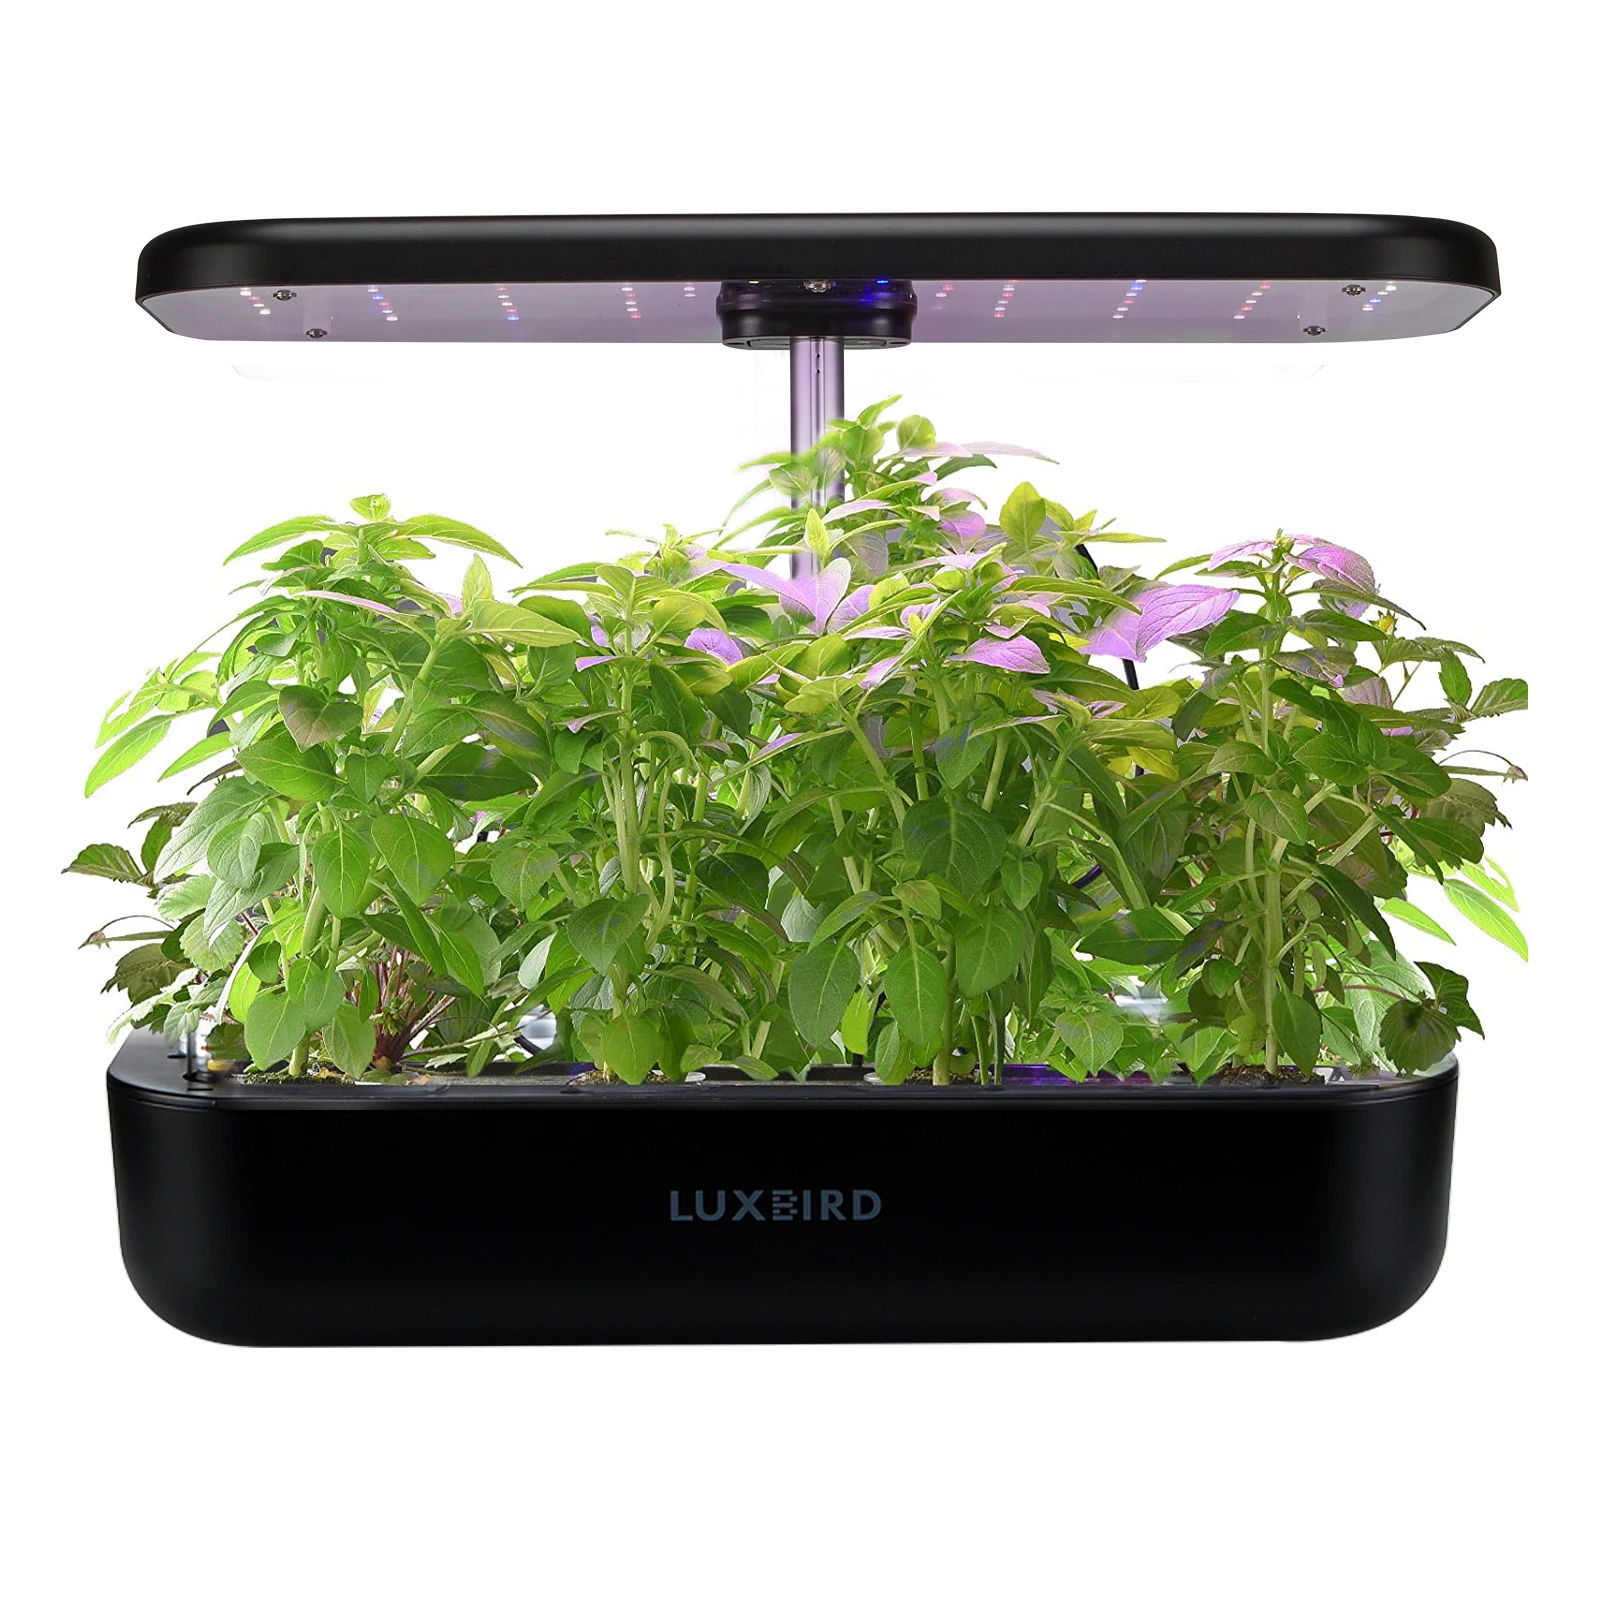 INKBIRD Hydroponics Growing System Height Adjustable with Smart LED Grow Light Large Capacity Germination Kit for Home Gardening